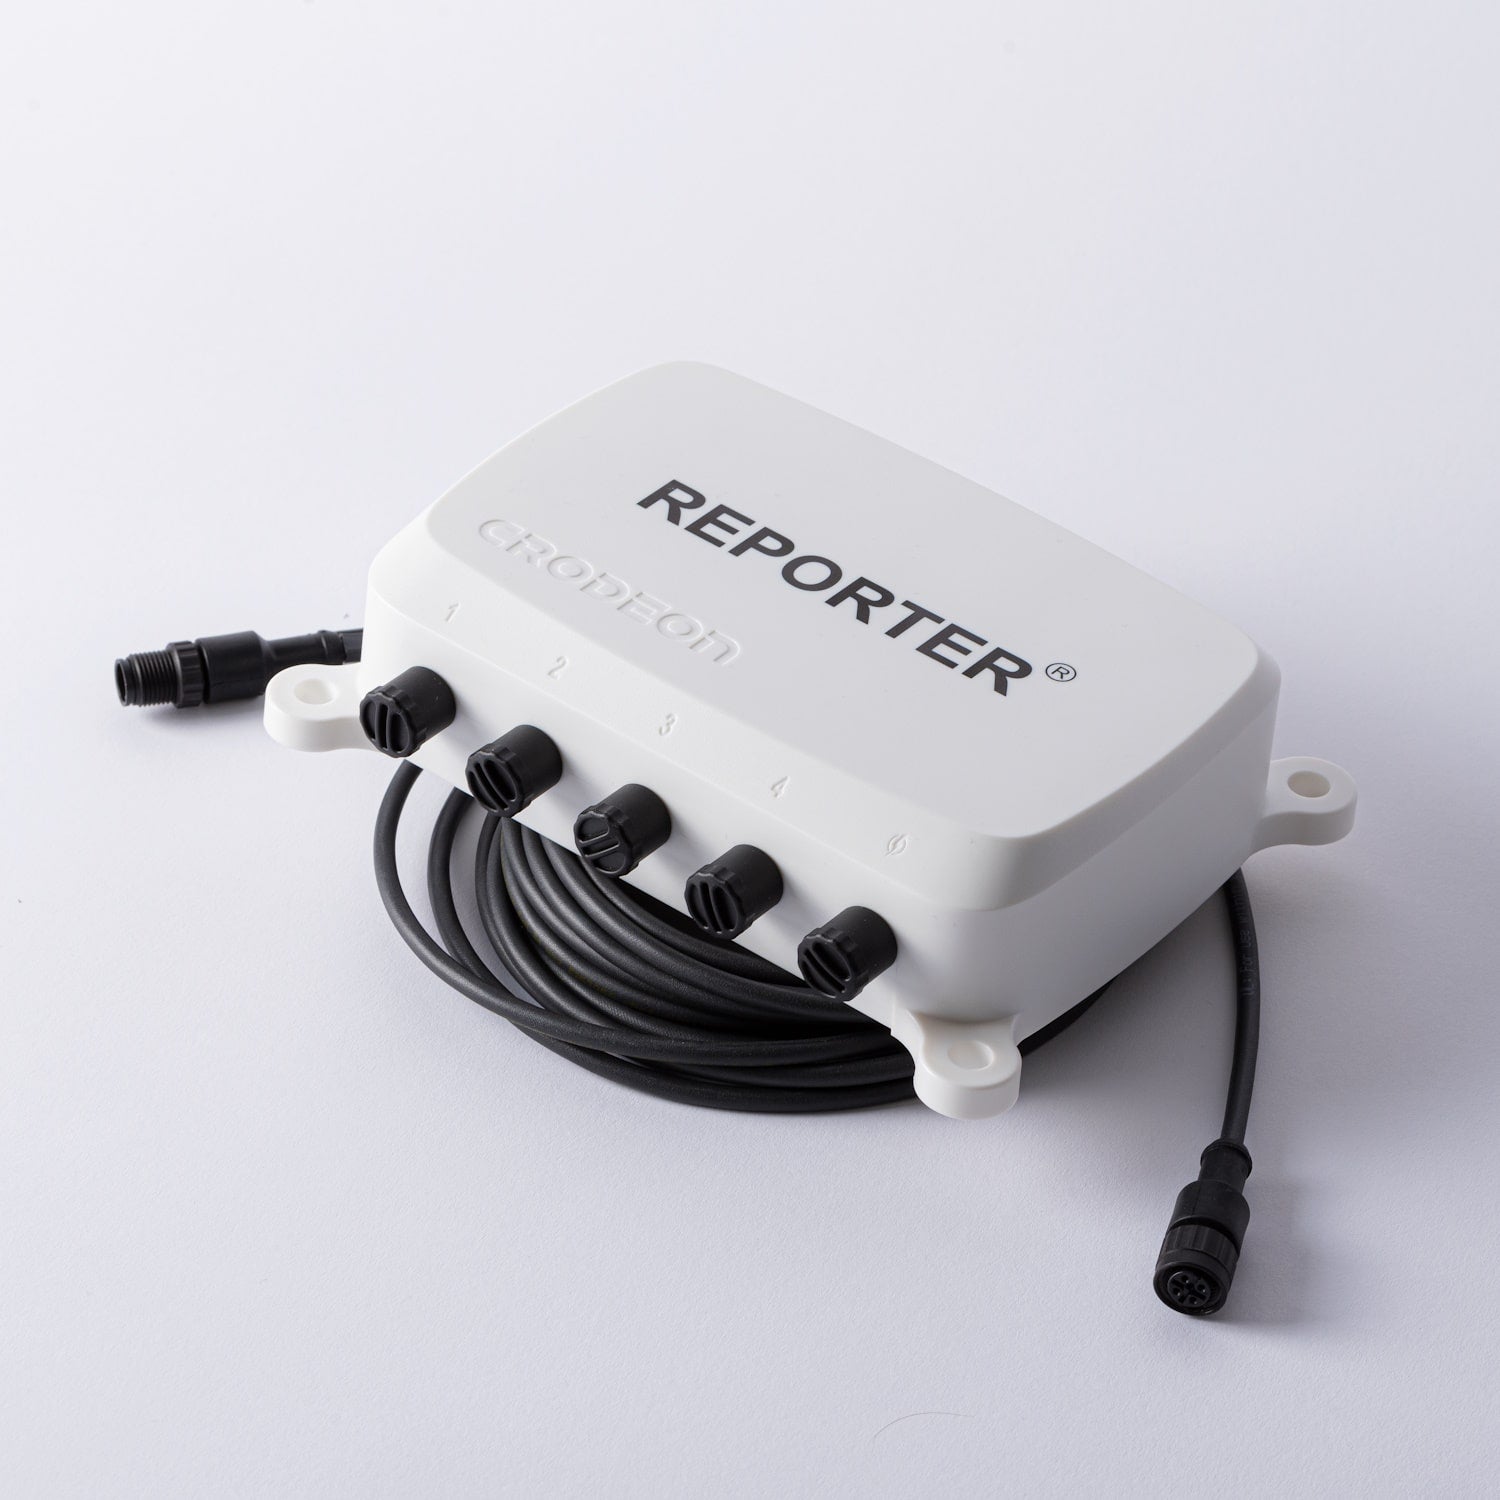 Sensor extension cord with Reporter